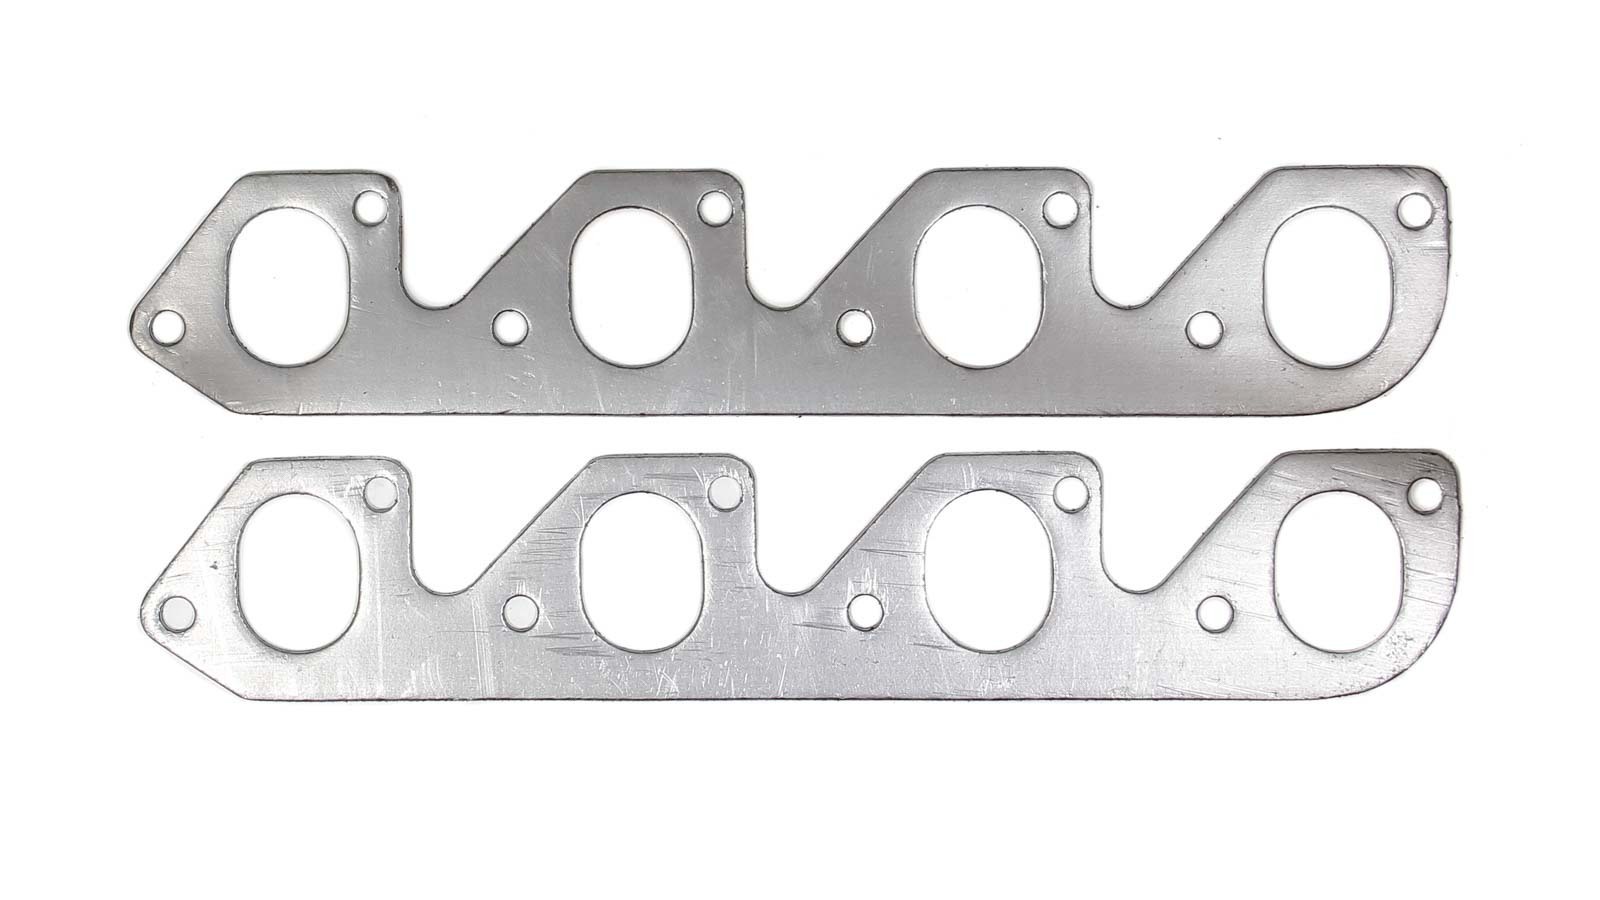 Remflex Gaskets 3006 Exhaust Manifold / Header Gasket, 1.500 x 2.000 in Oval Port, Graphite, Ford Cleveland / Modified, Pair